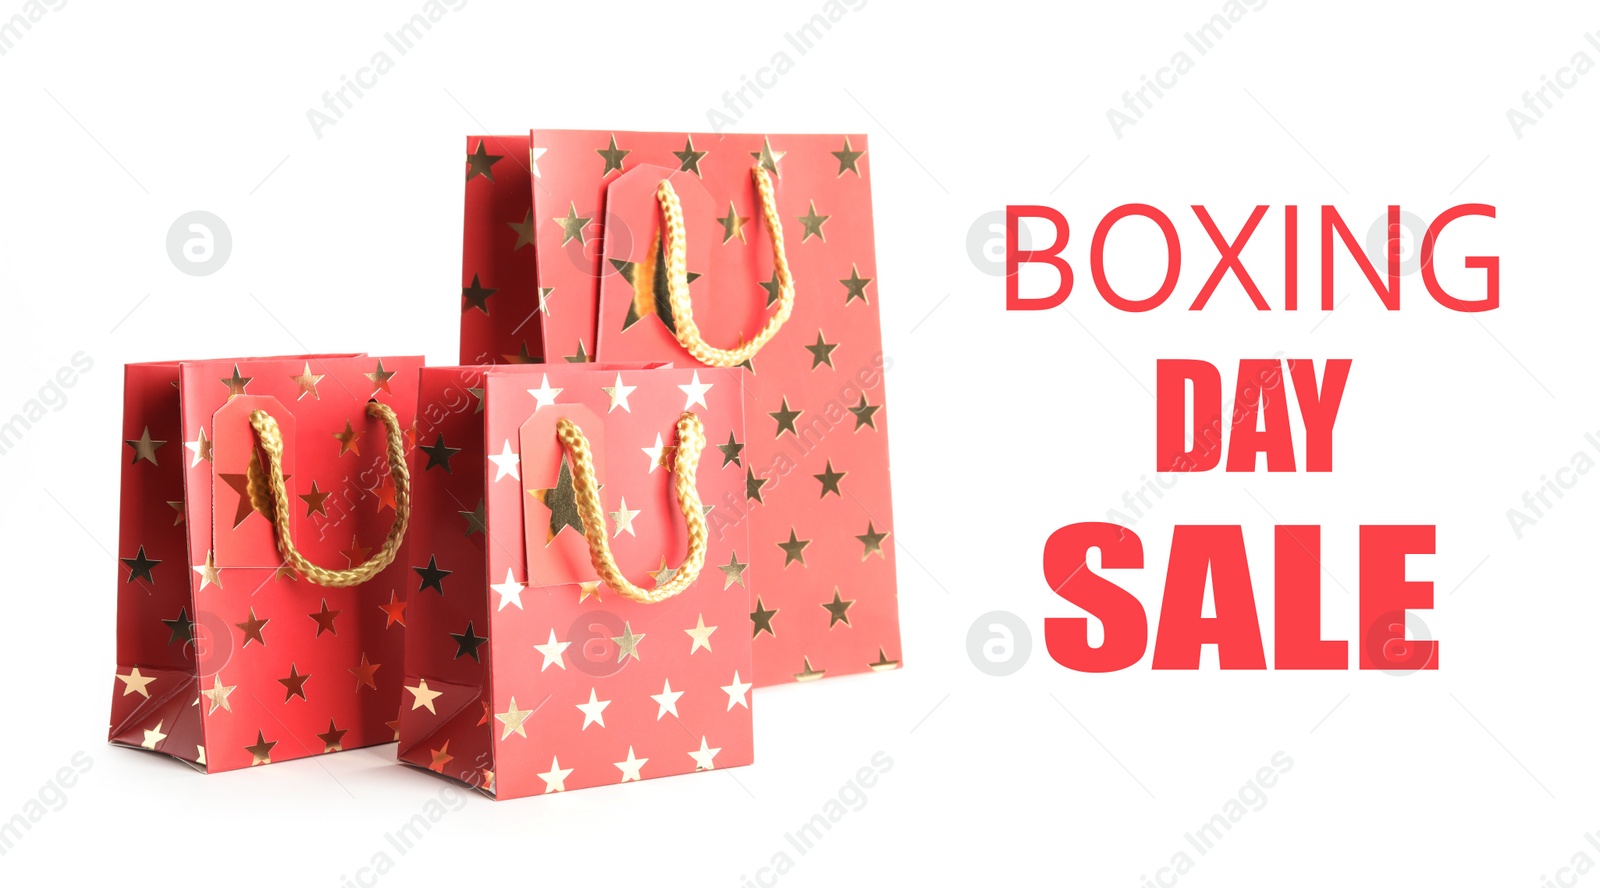 Image of Boxing day sale. Shopping bags on white background, banner design